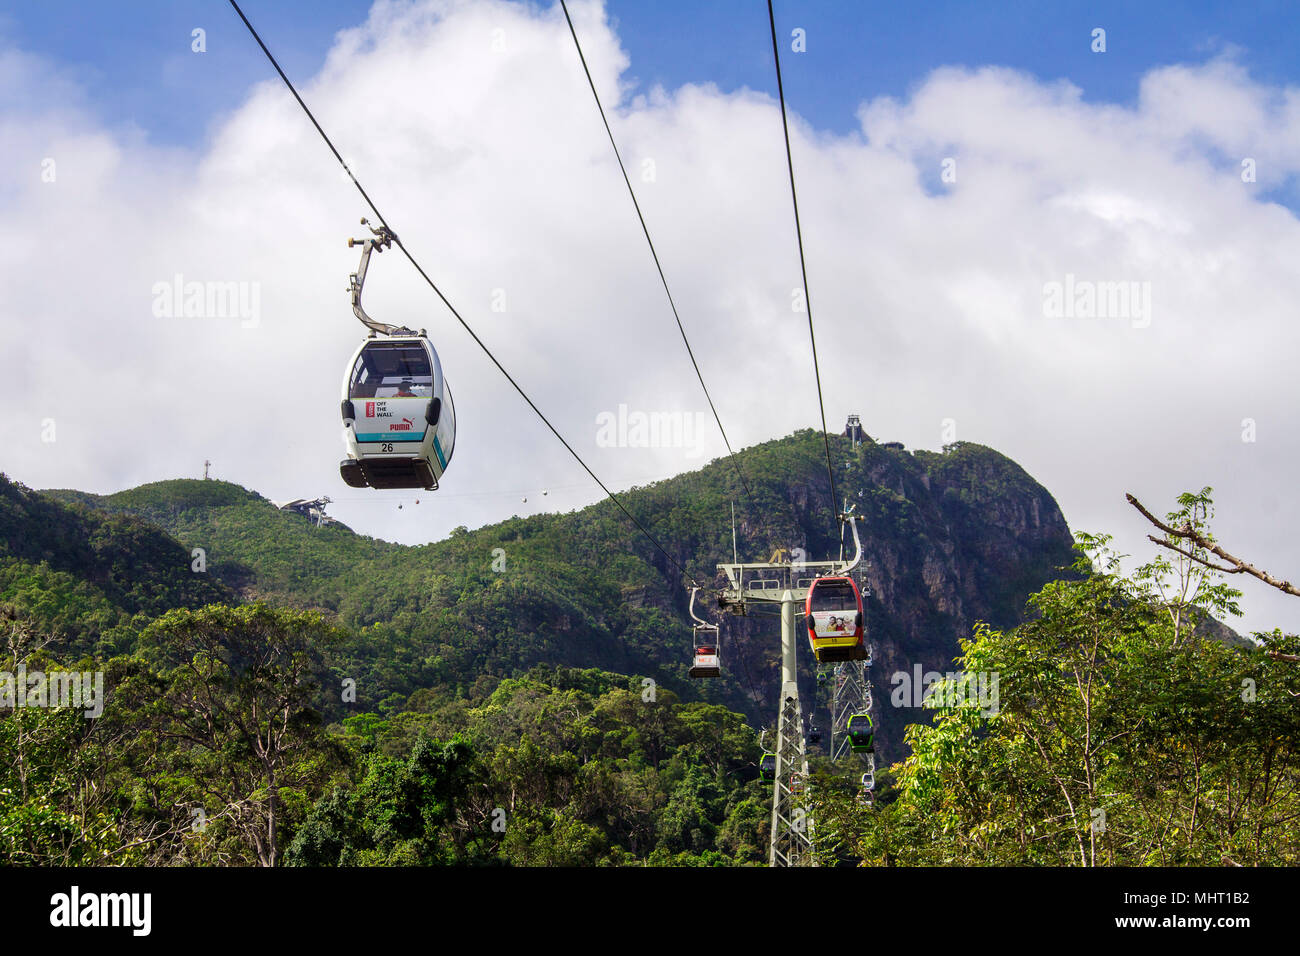 The Langkawi Cable car or SkyCab, is the major attractions in the island. It was officially opened in 2003 by former prime minister Tun . mahathir Stock Photo